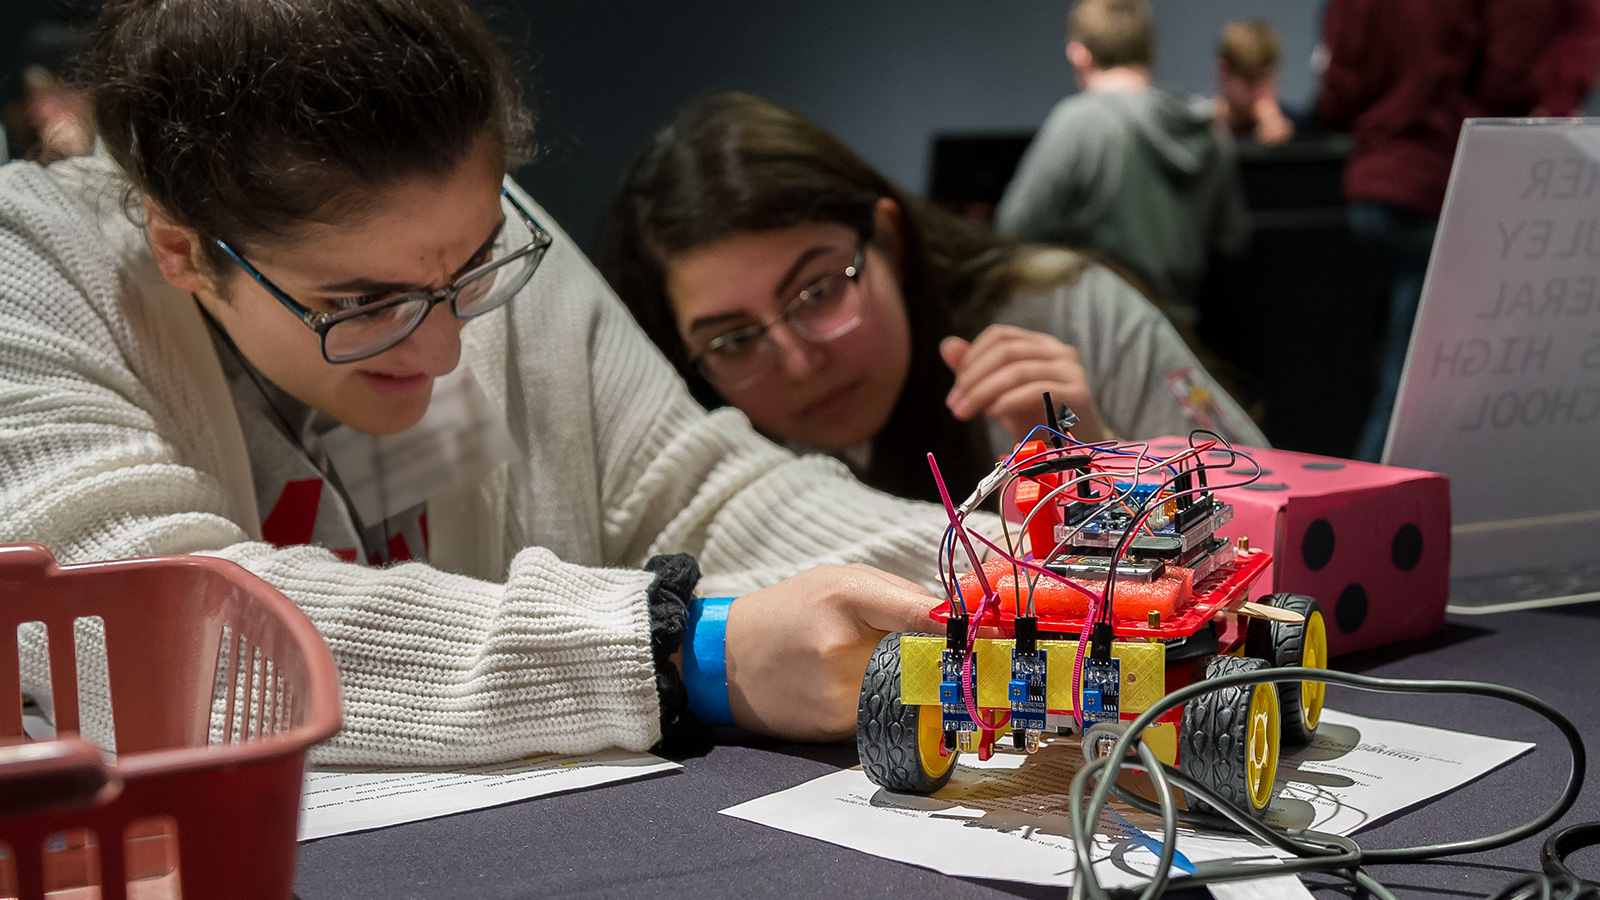 Students from Mother McAuley hurried to make last-minute tweaks to their autonomous vehicle before testing began. (Image by Argonne National Laboratory / Mark Lopez.)